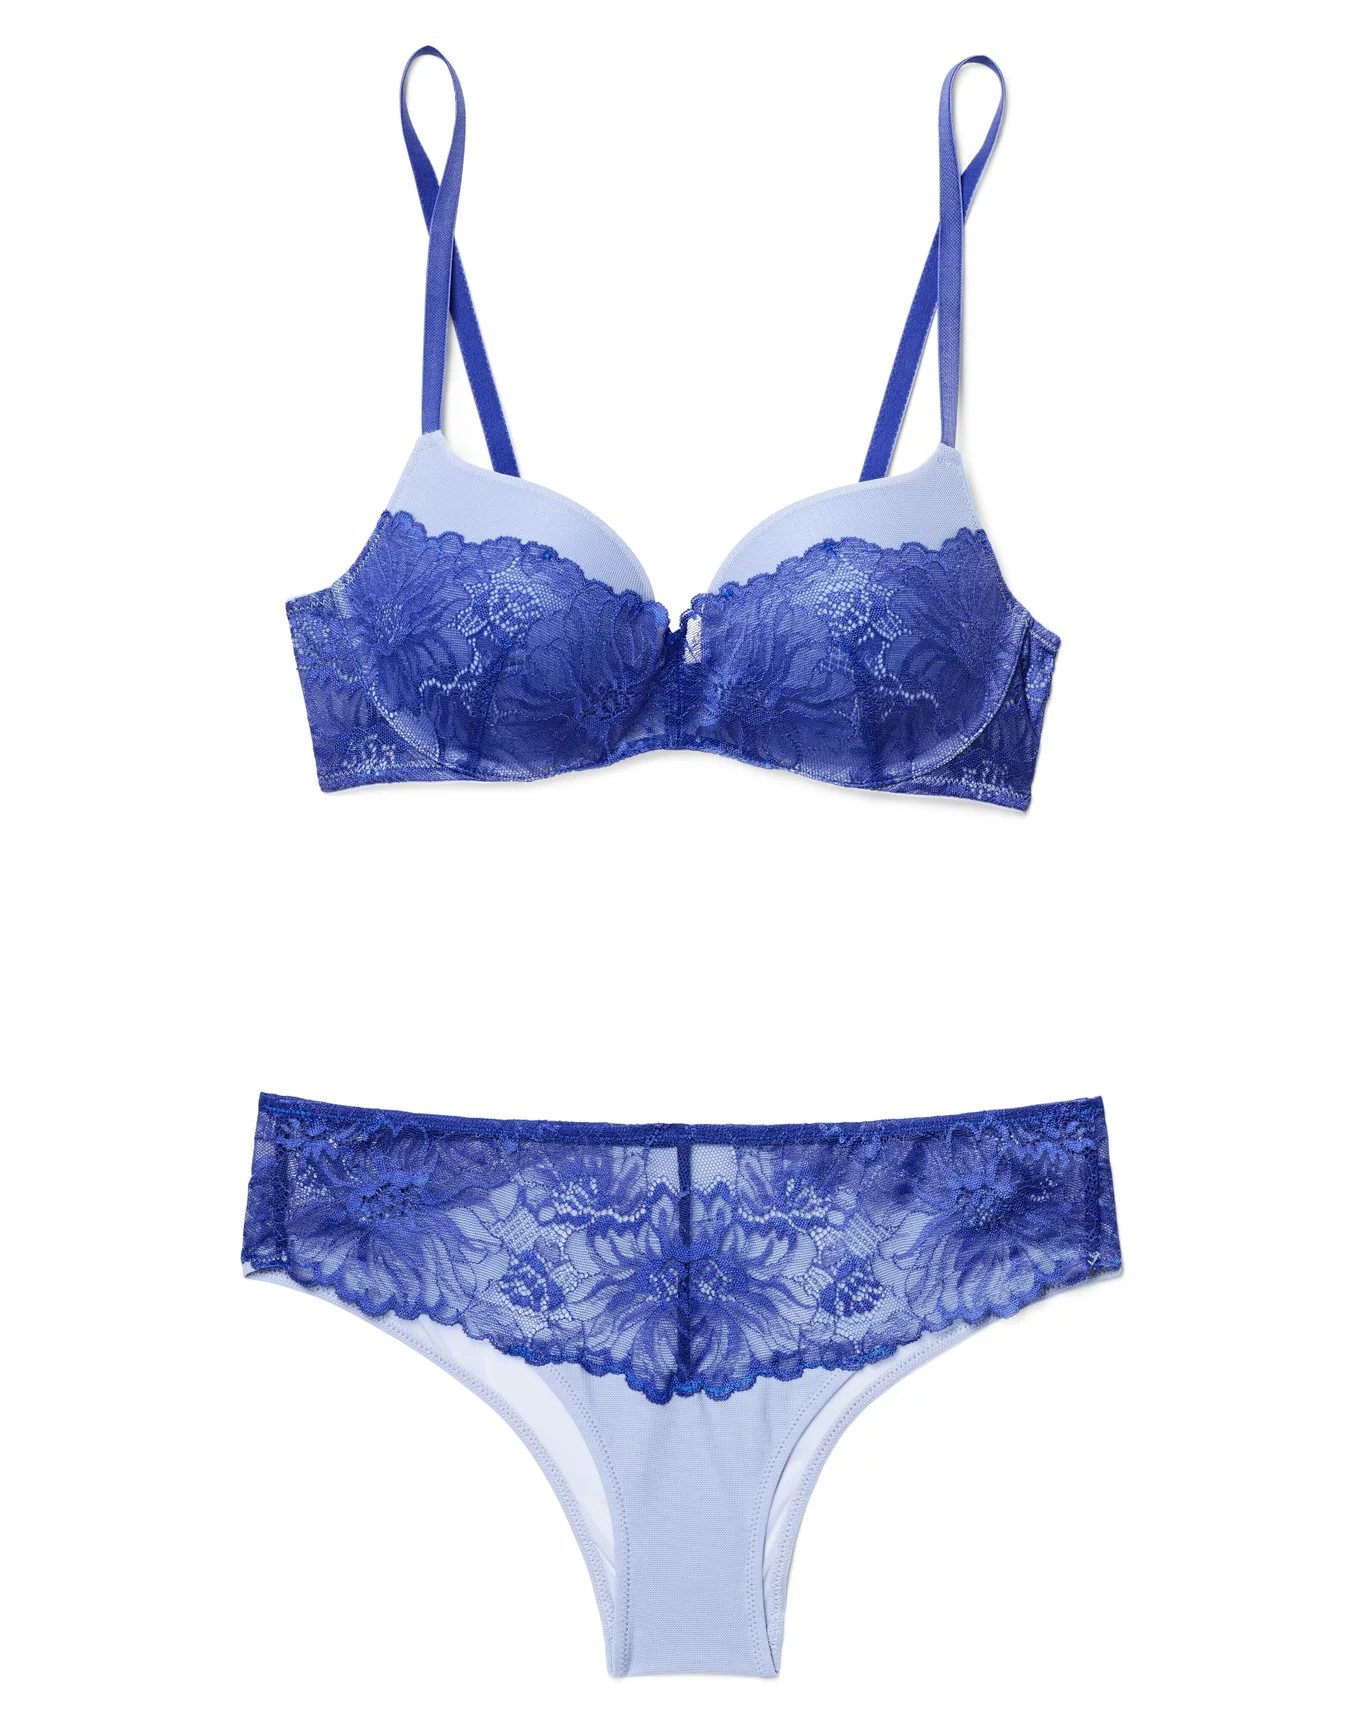 Buy Bralux Angeleena Sky Blue-Turquoise Blue Lace Full Cup B Bra Set of 2  at